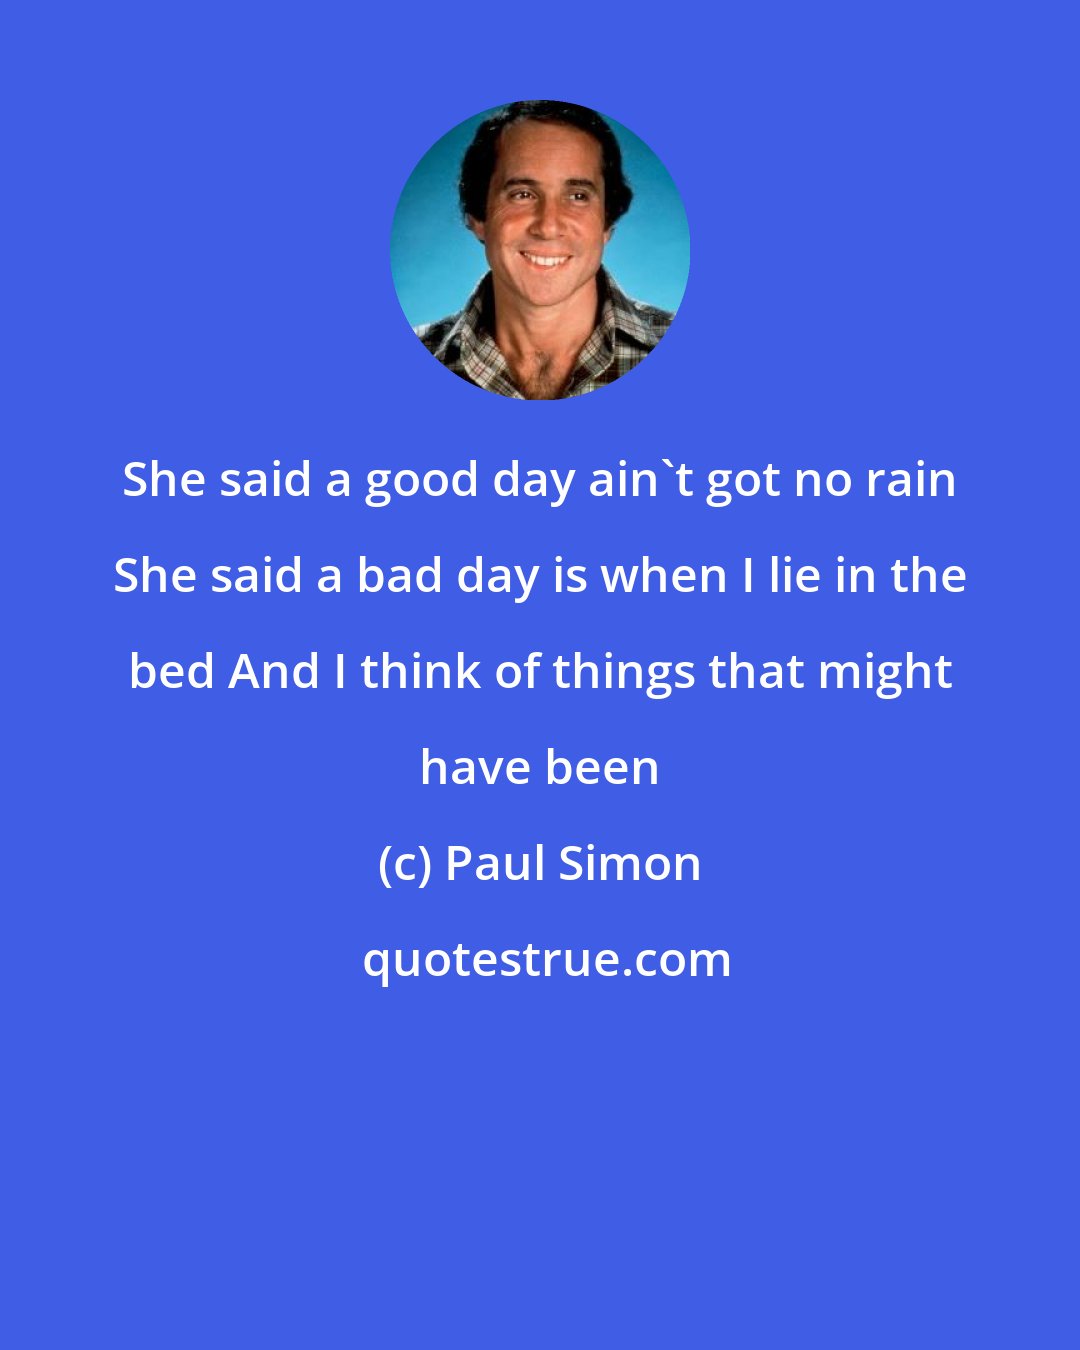 Paul Simon: She said a good day ain't got no rain She said a bad day is when I lie in the bed And I think of things that might have been